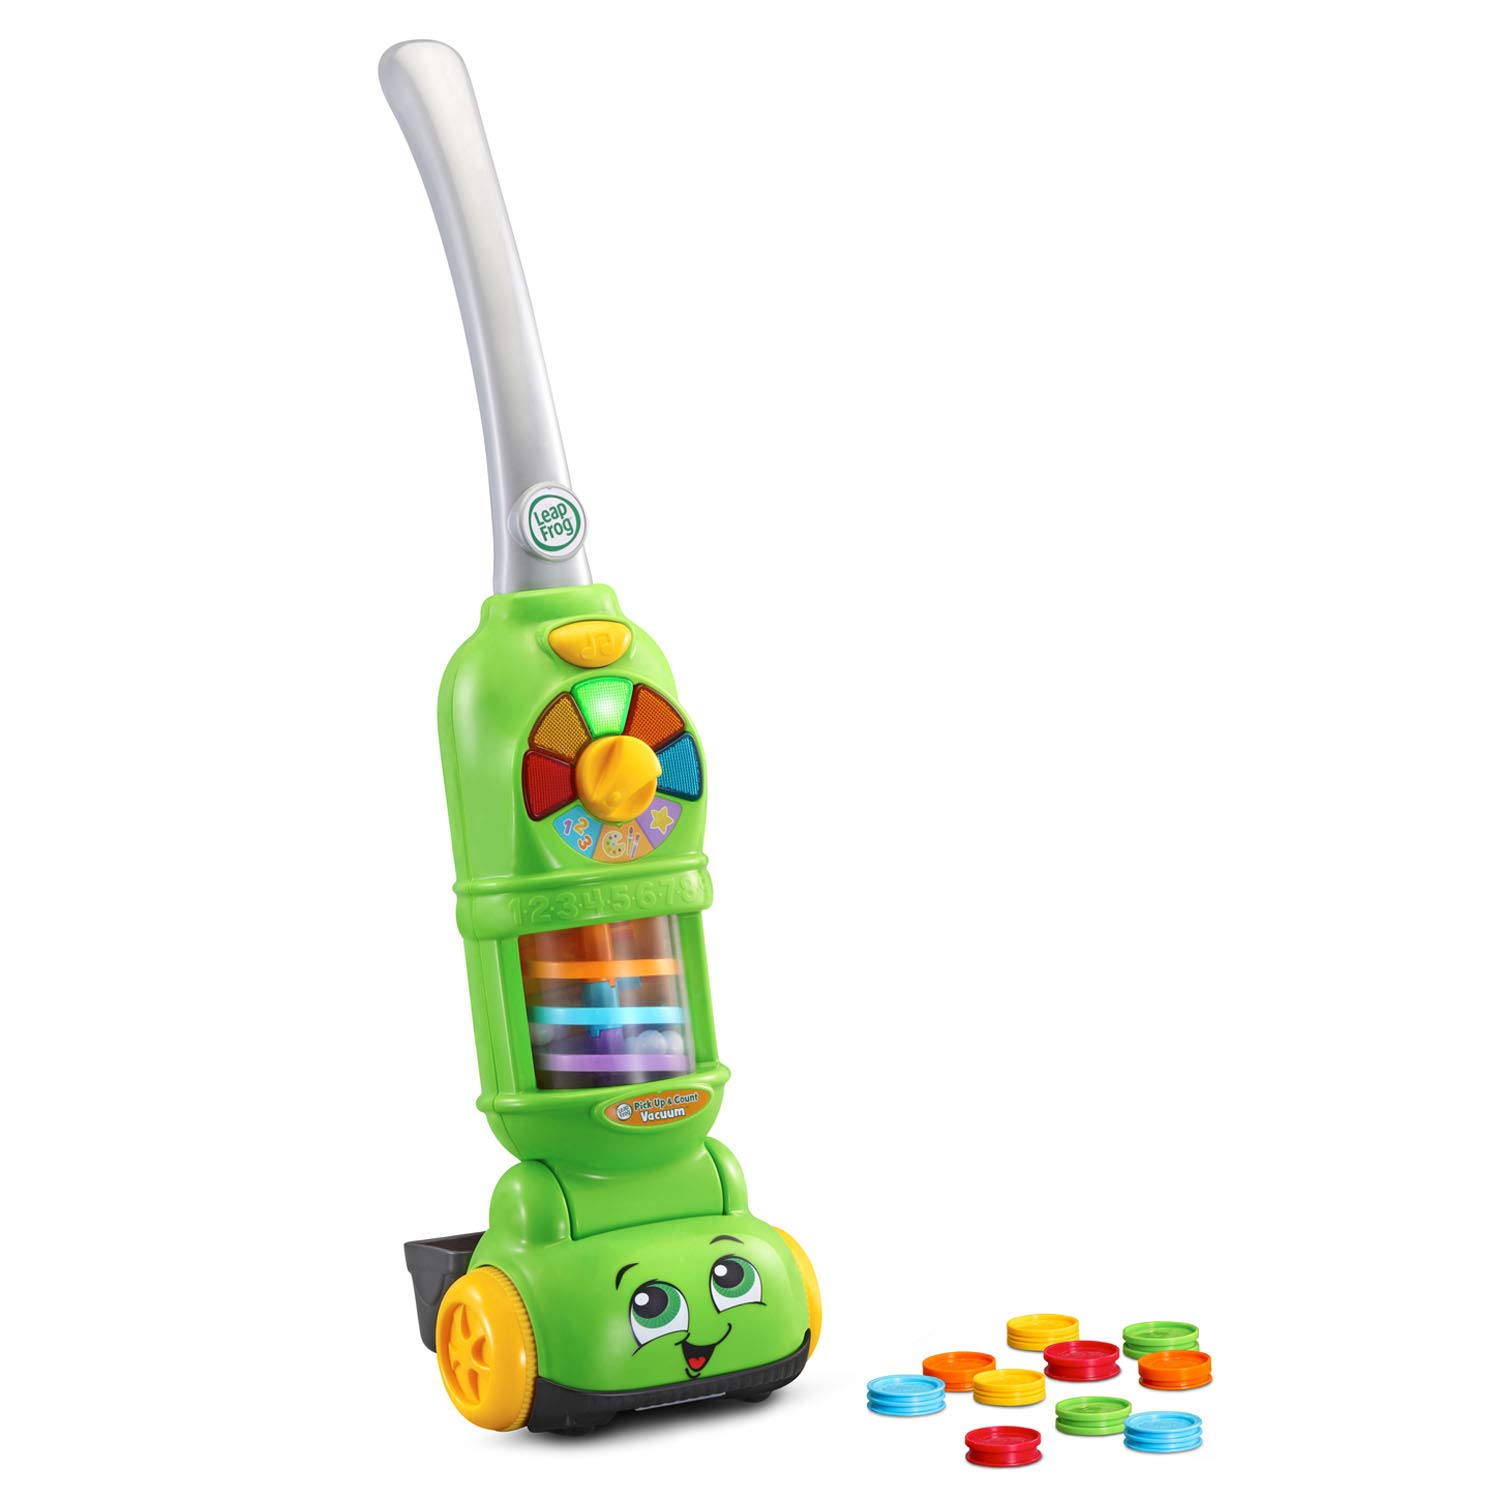 LeapFrog Pick Up & Count Toy Vacuum (Green) $15 + Free Shipping w/ Prime or on $35+